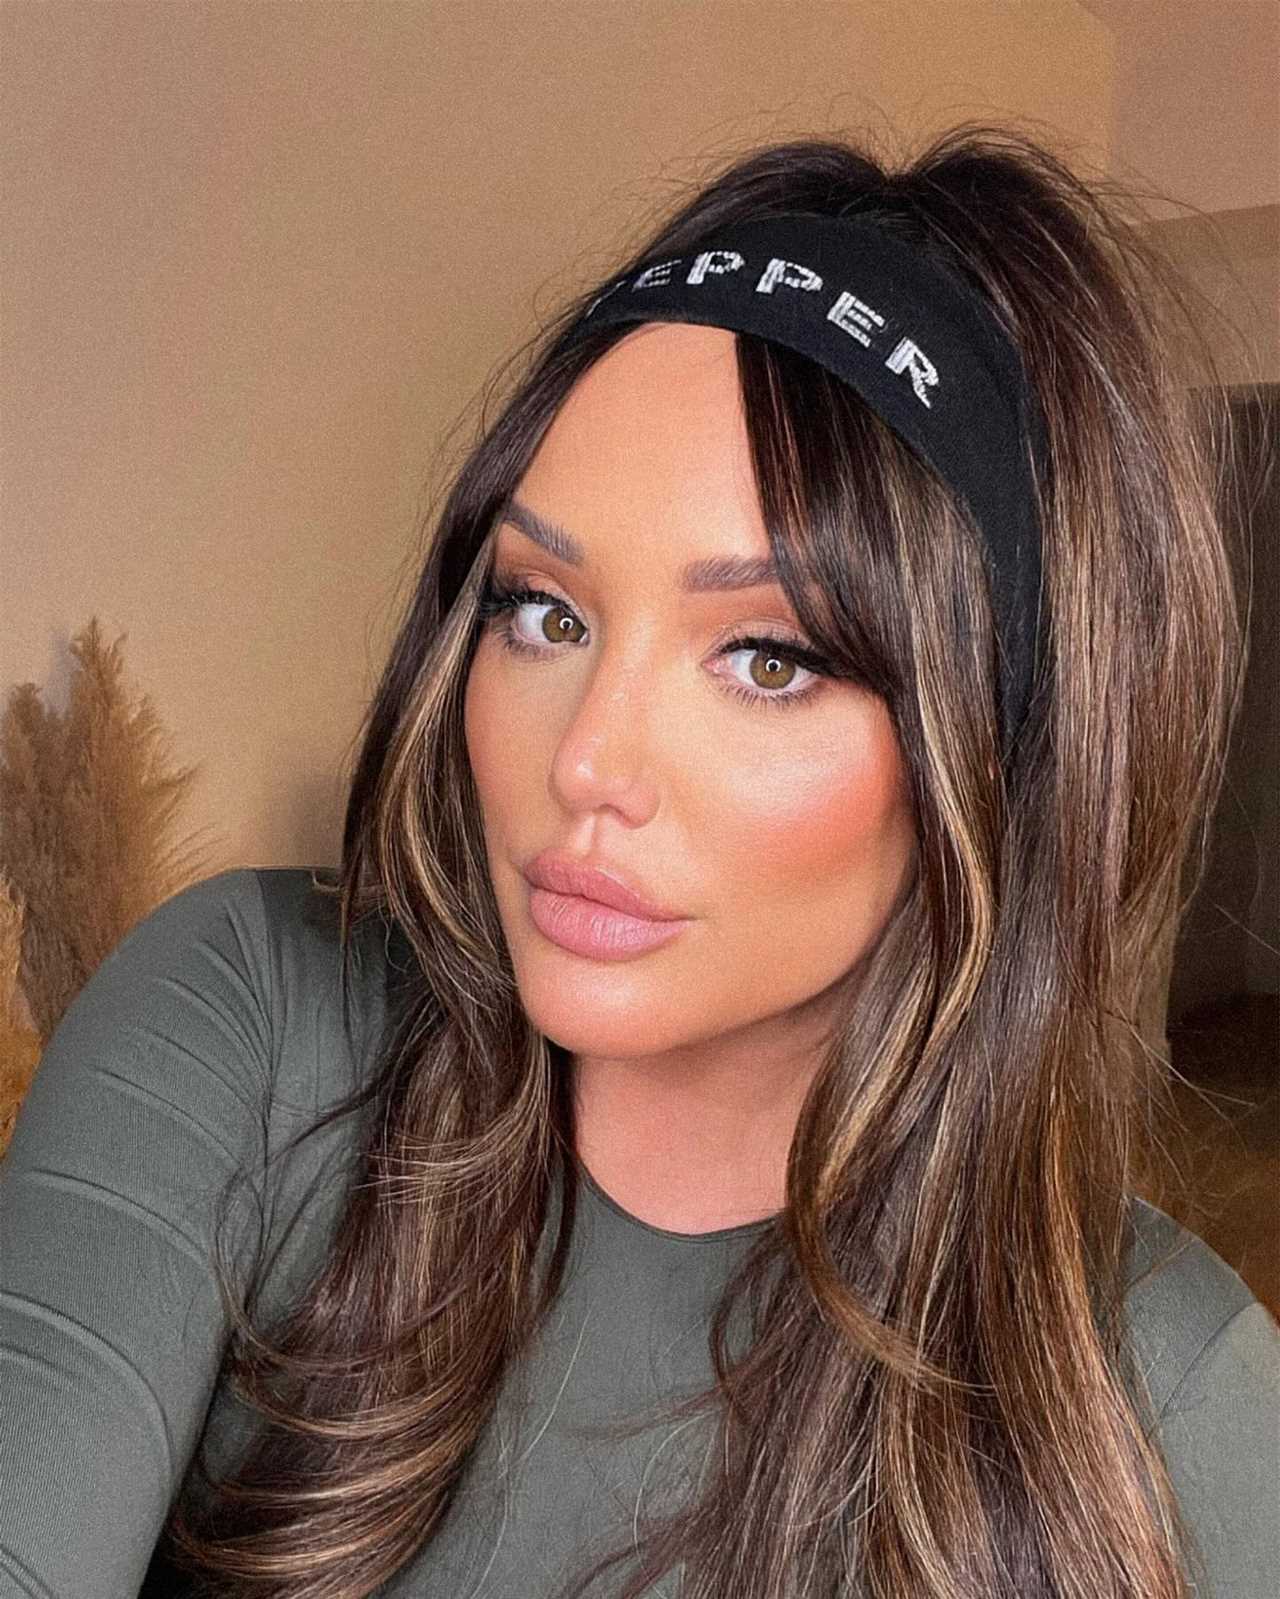 Charlotte Crosby Poses Topless After Recovering from Pneumonia